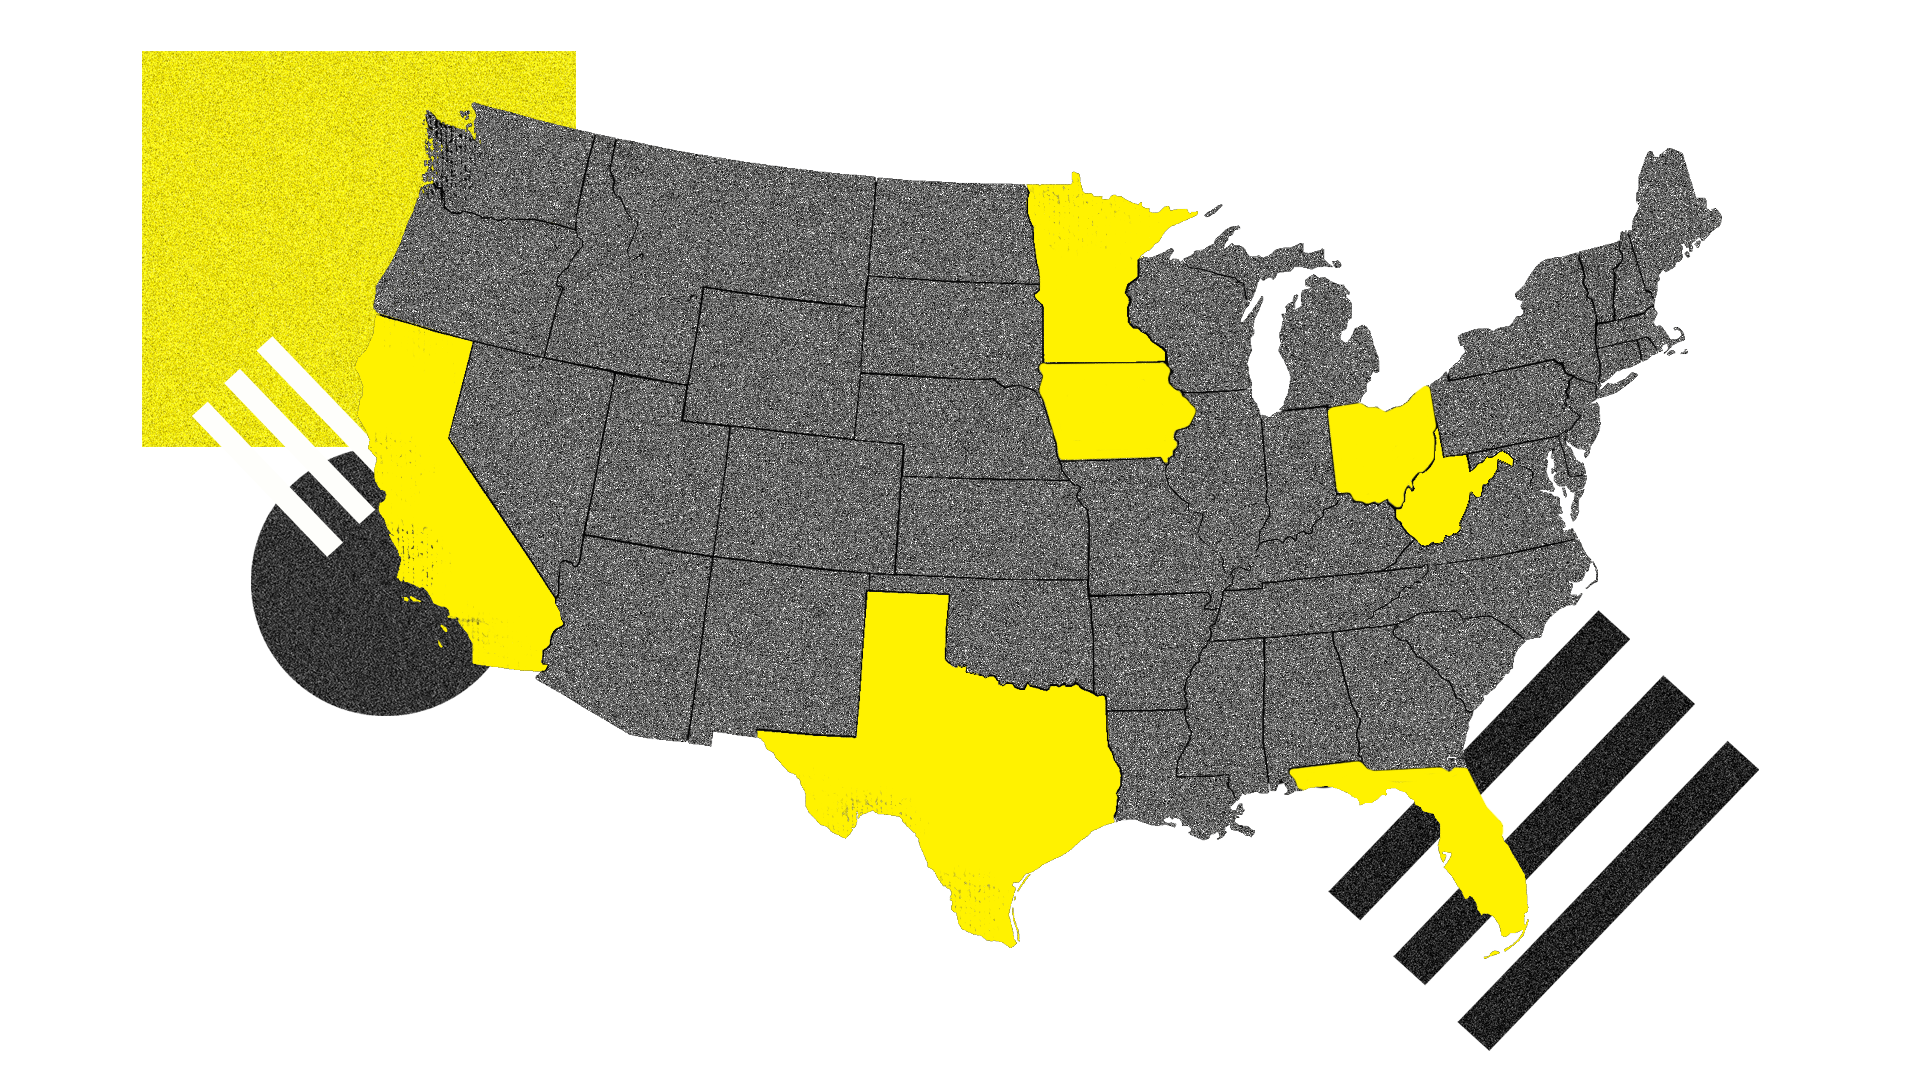 A map of the United States with the Axios 8 states highlighted